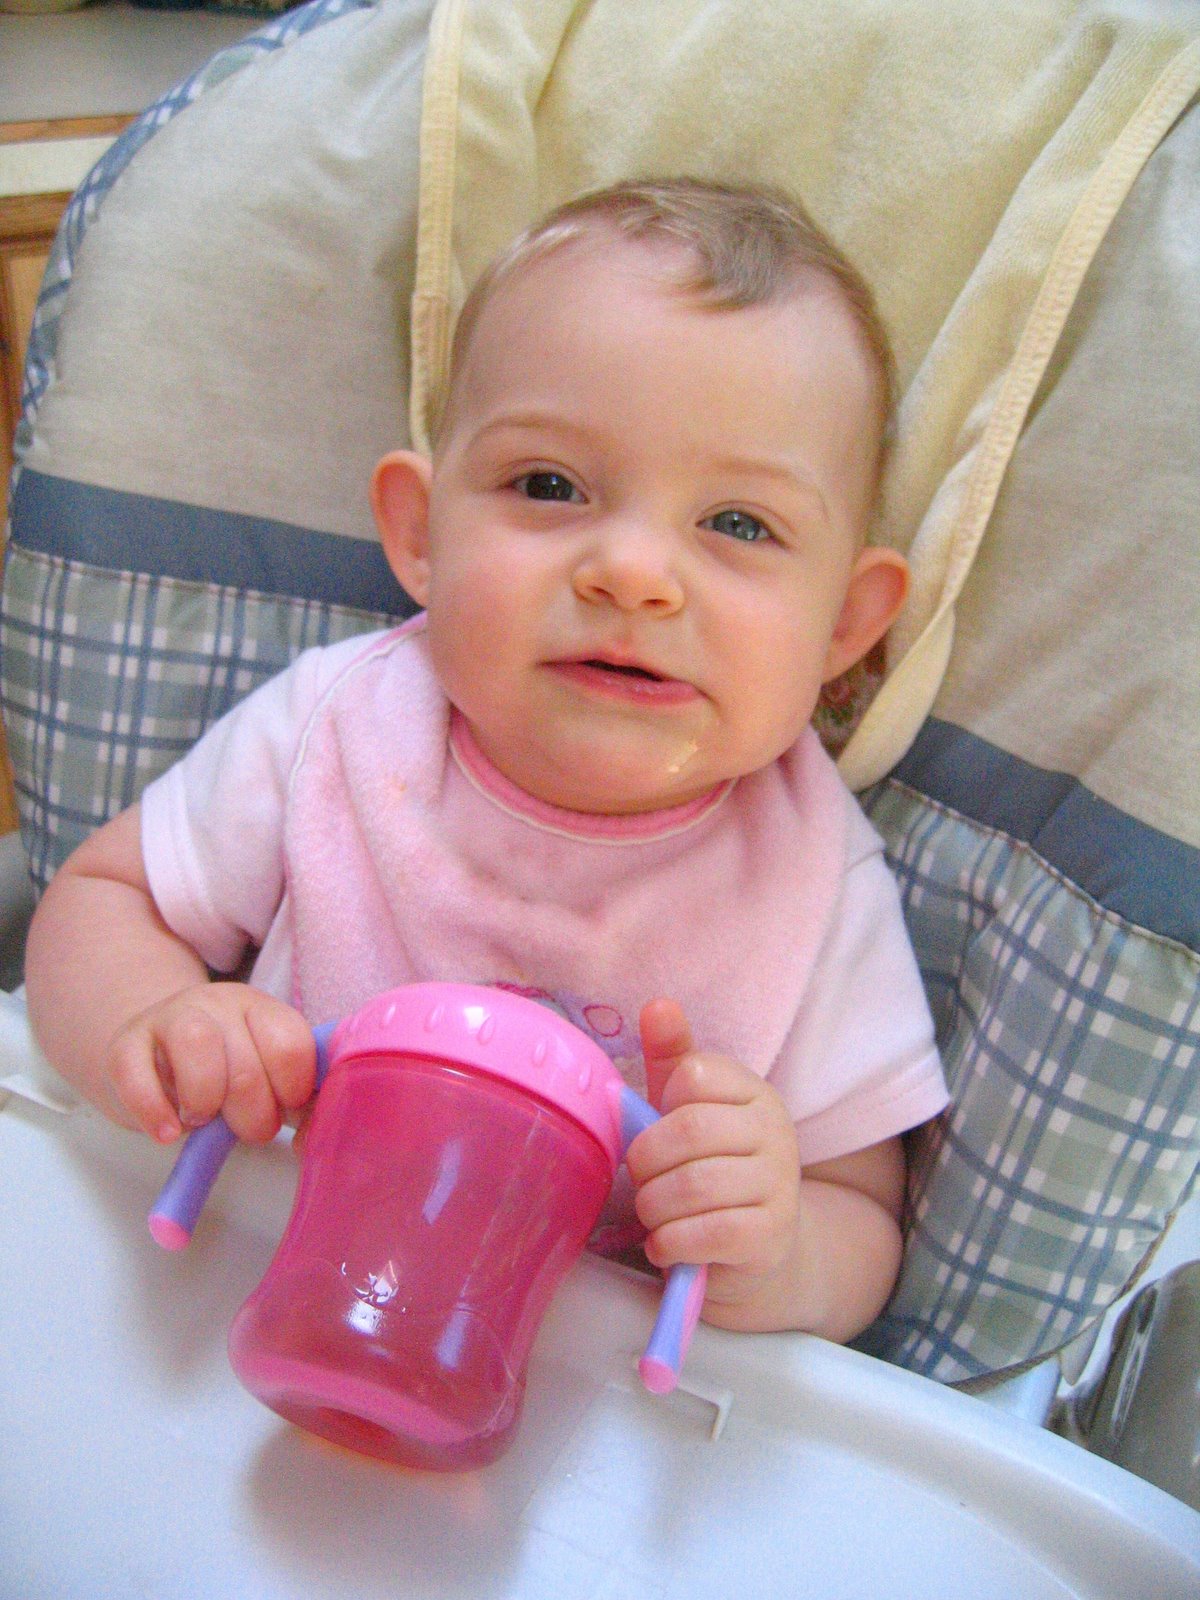 [sippy+cup+007.jpg]